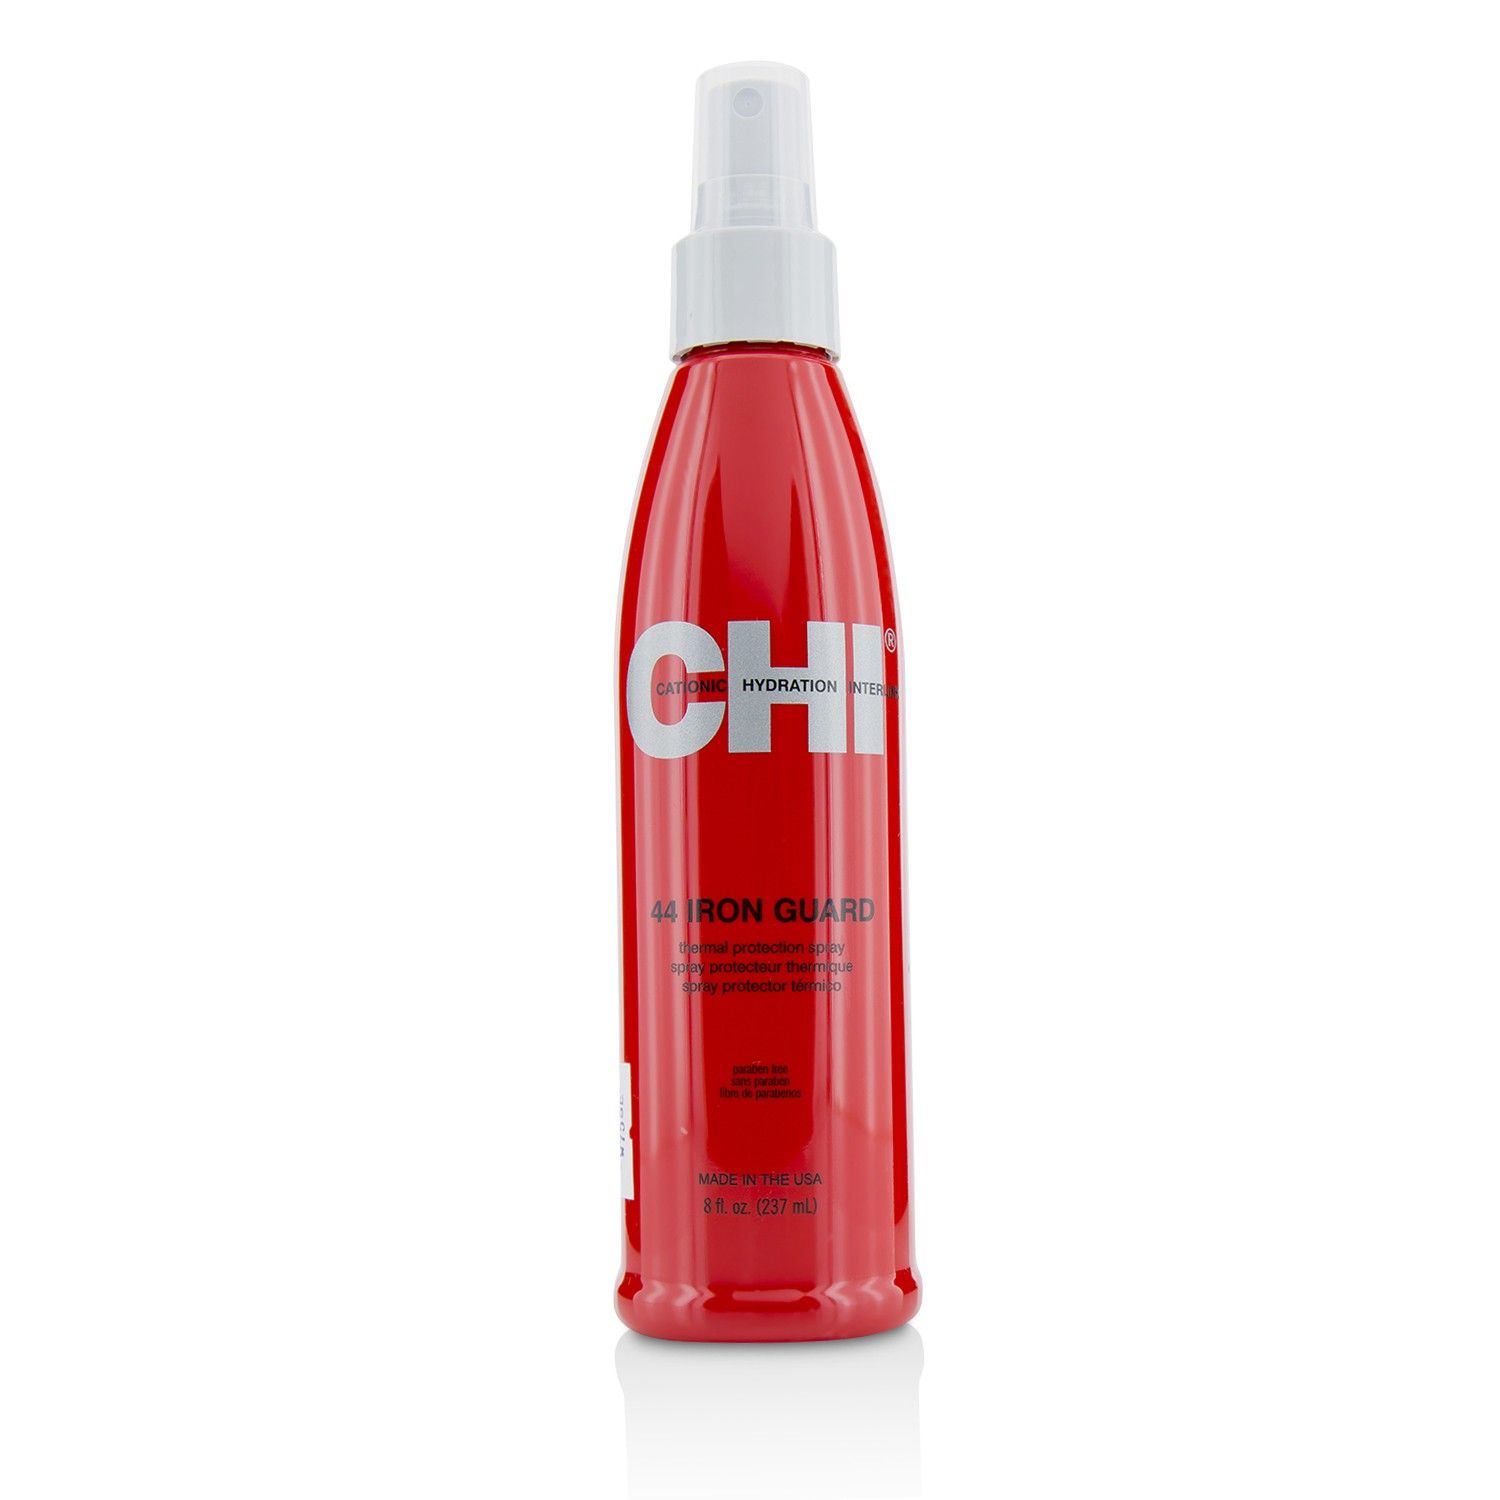 CHI - CHI44隔熱防護噴霧CHI44 Iron Guard Thermal Protection Spray